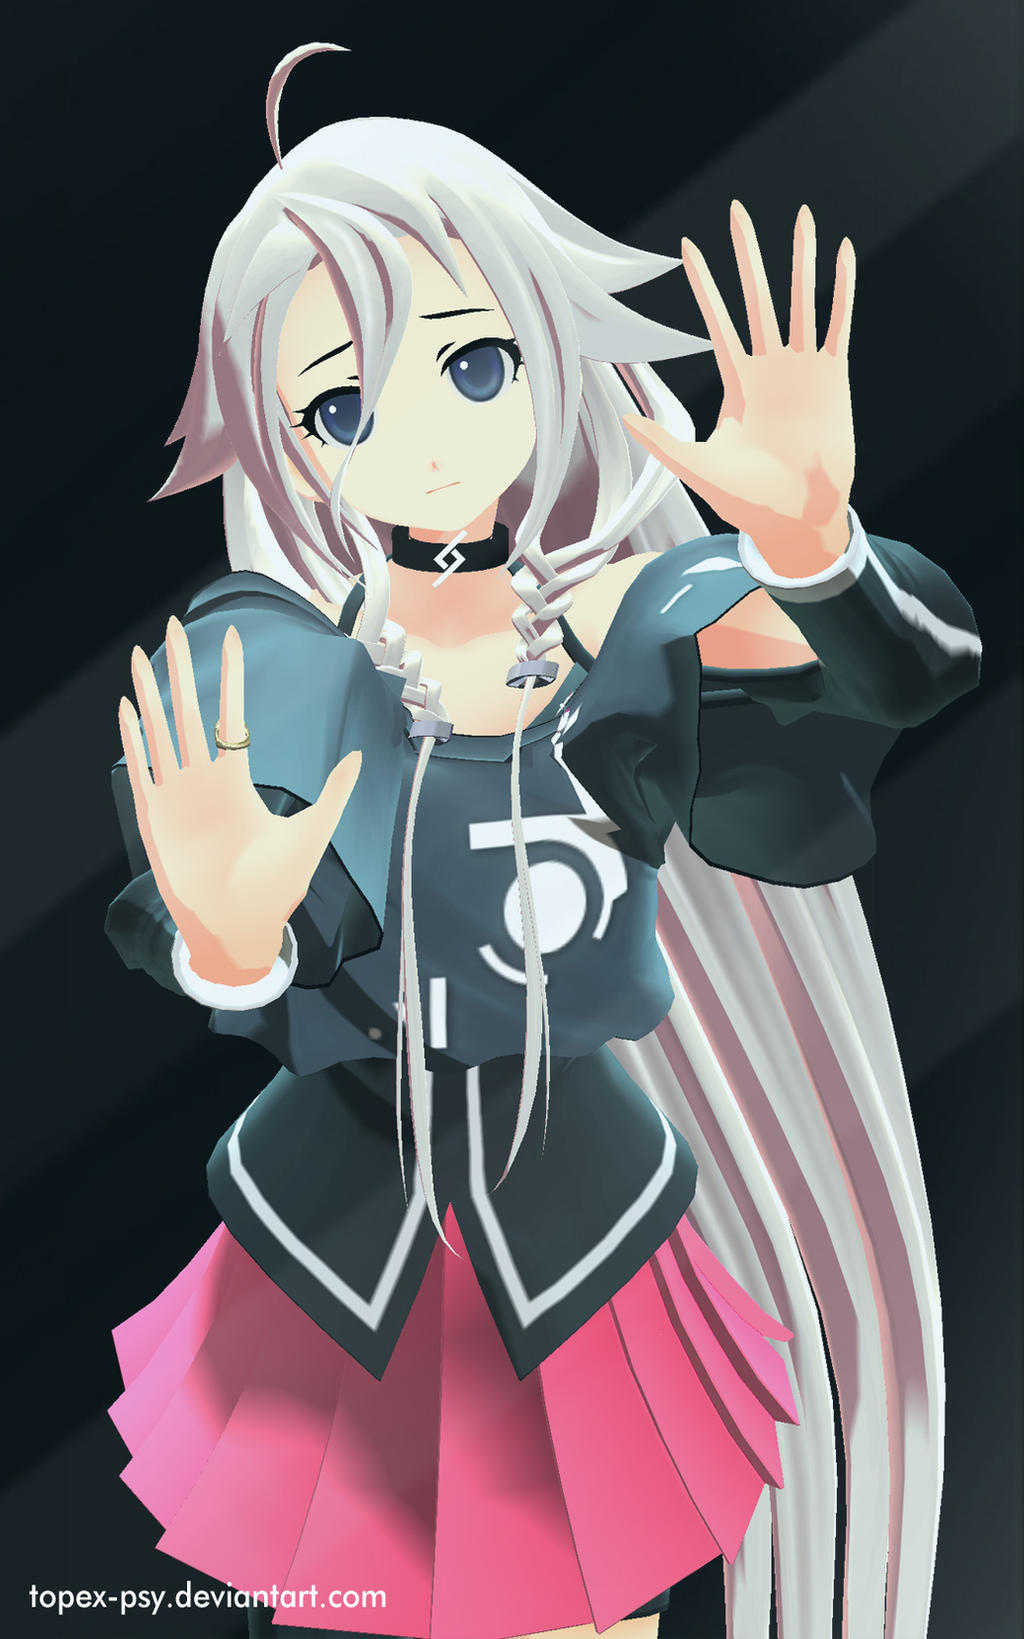 Mmd Ia Vocaloid Let Me Out Android Wallpaper By Topex Psy On Deviantart